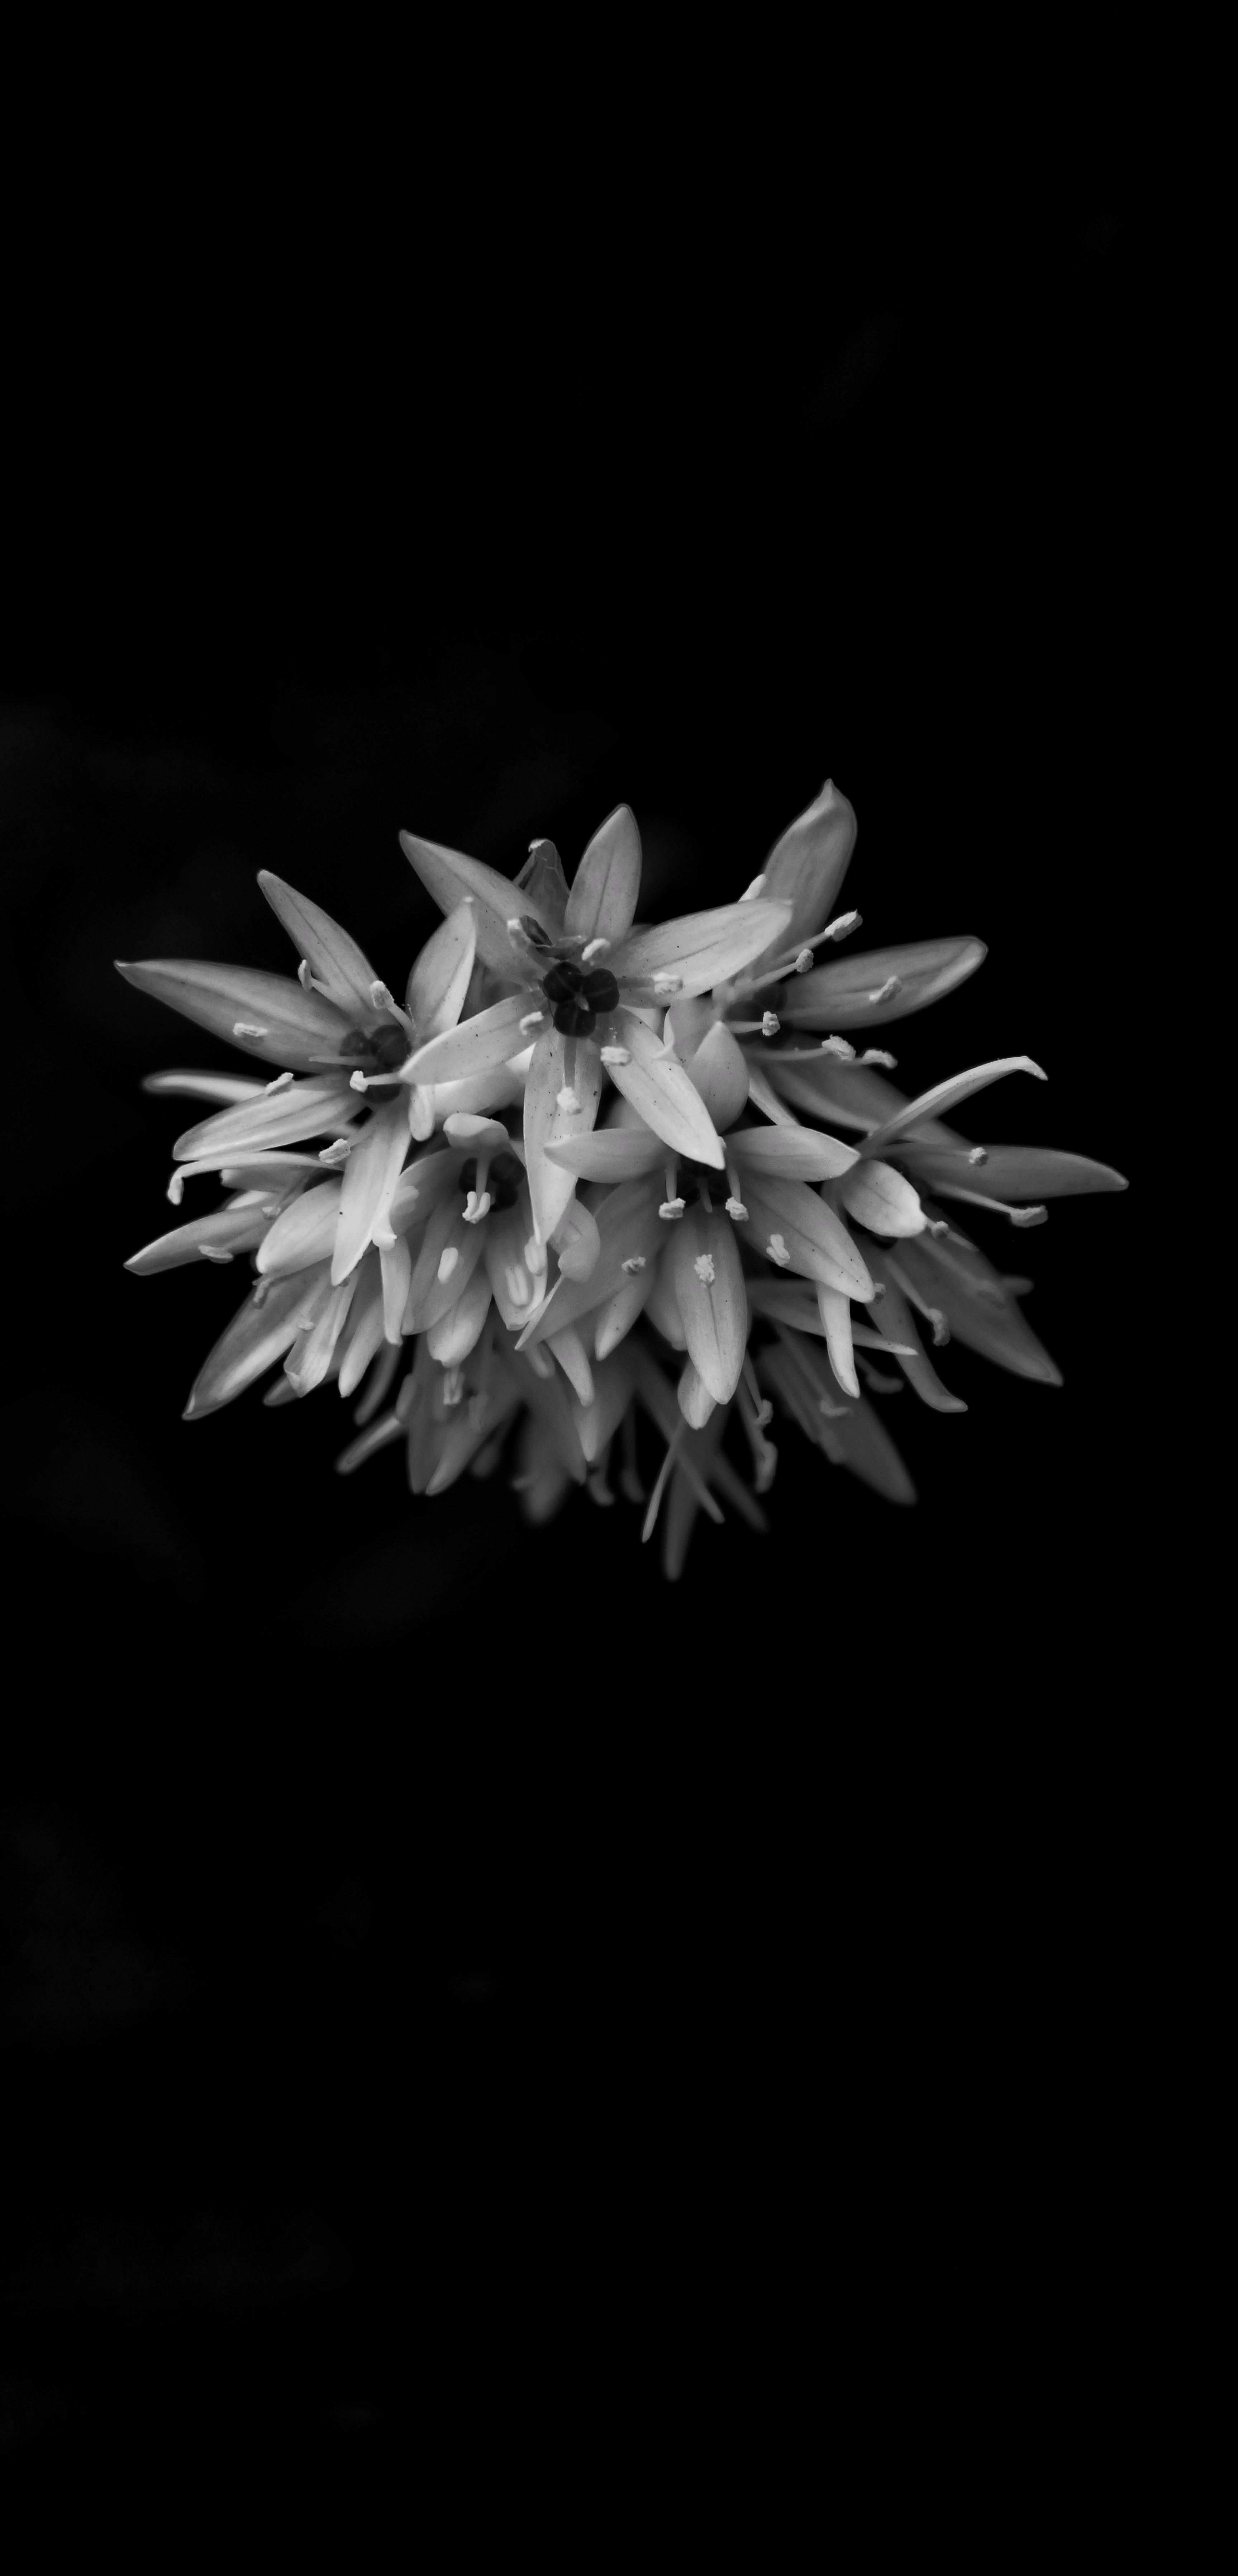 Black and White Photo of Flowers for Smartphones HD wallpaper